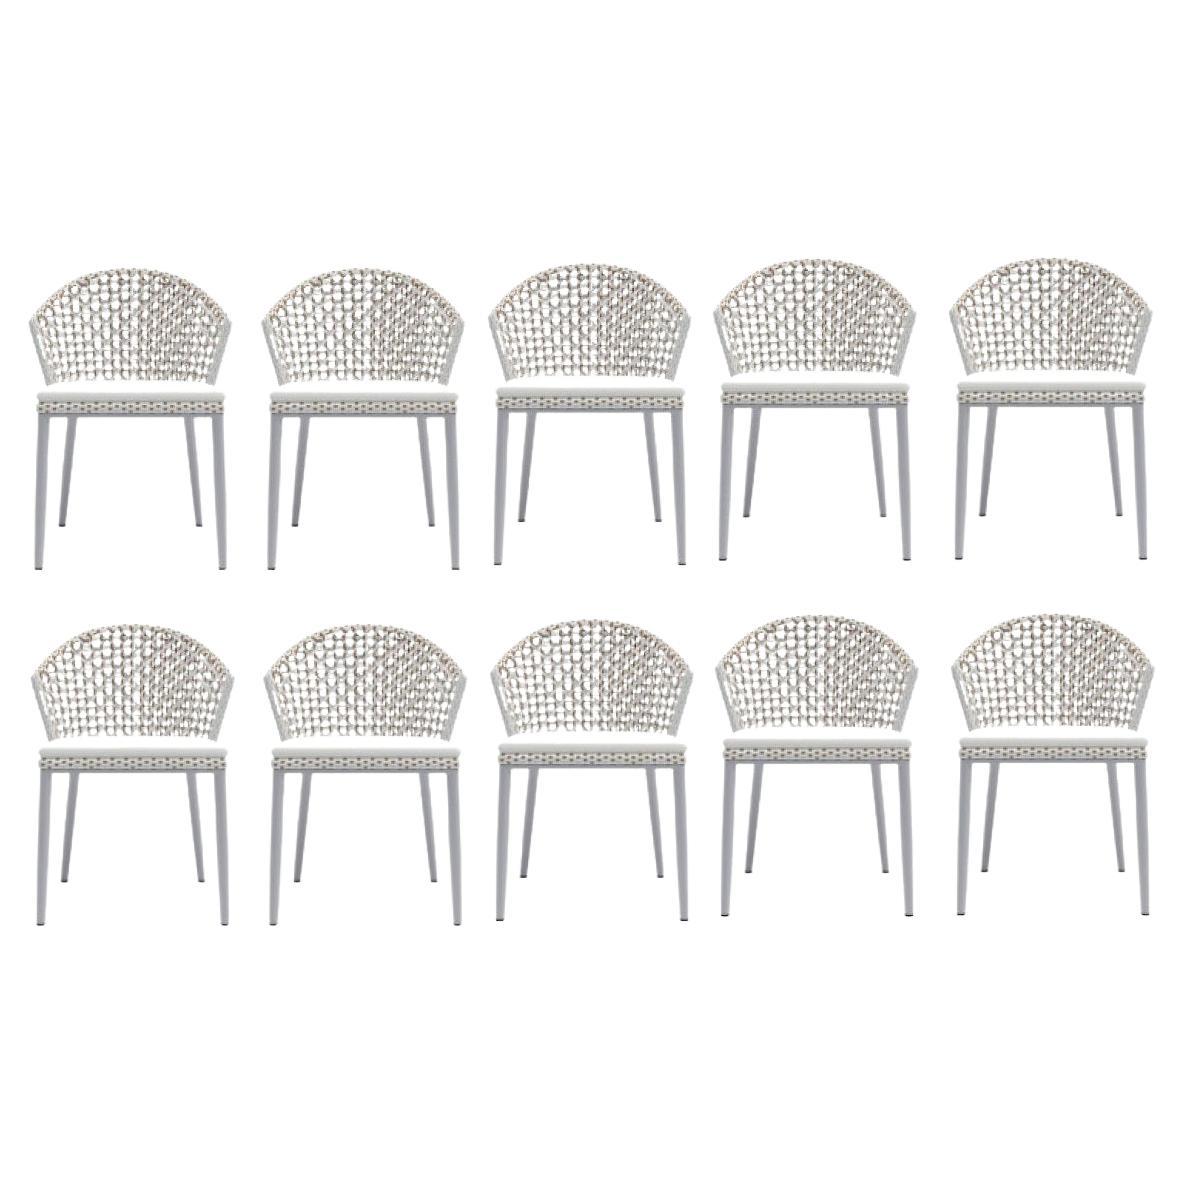 Outdoor Dining Chairs in Weather Resistant Wicker / Set of 10